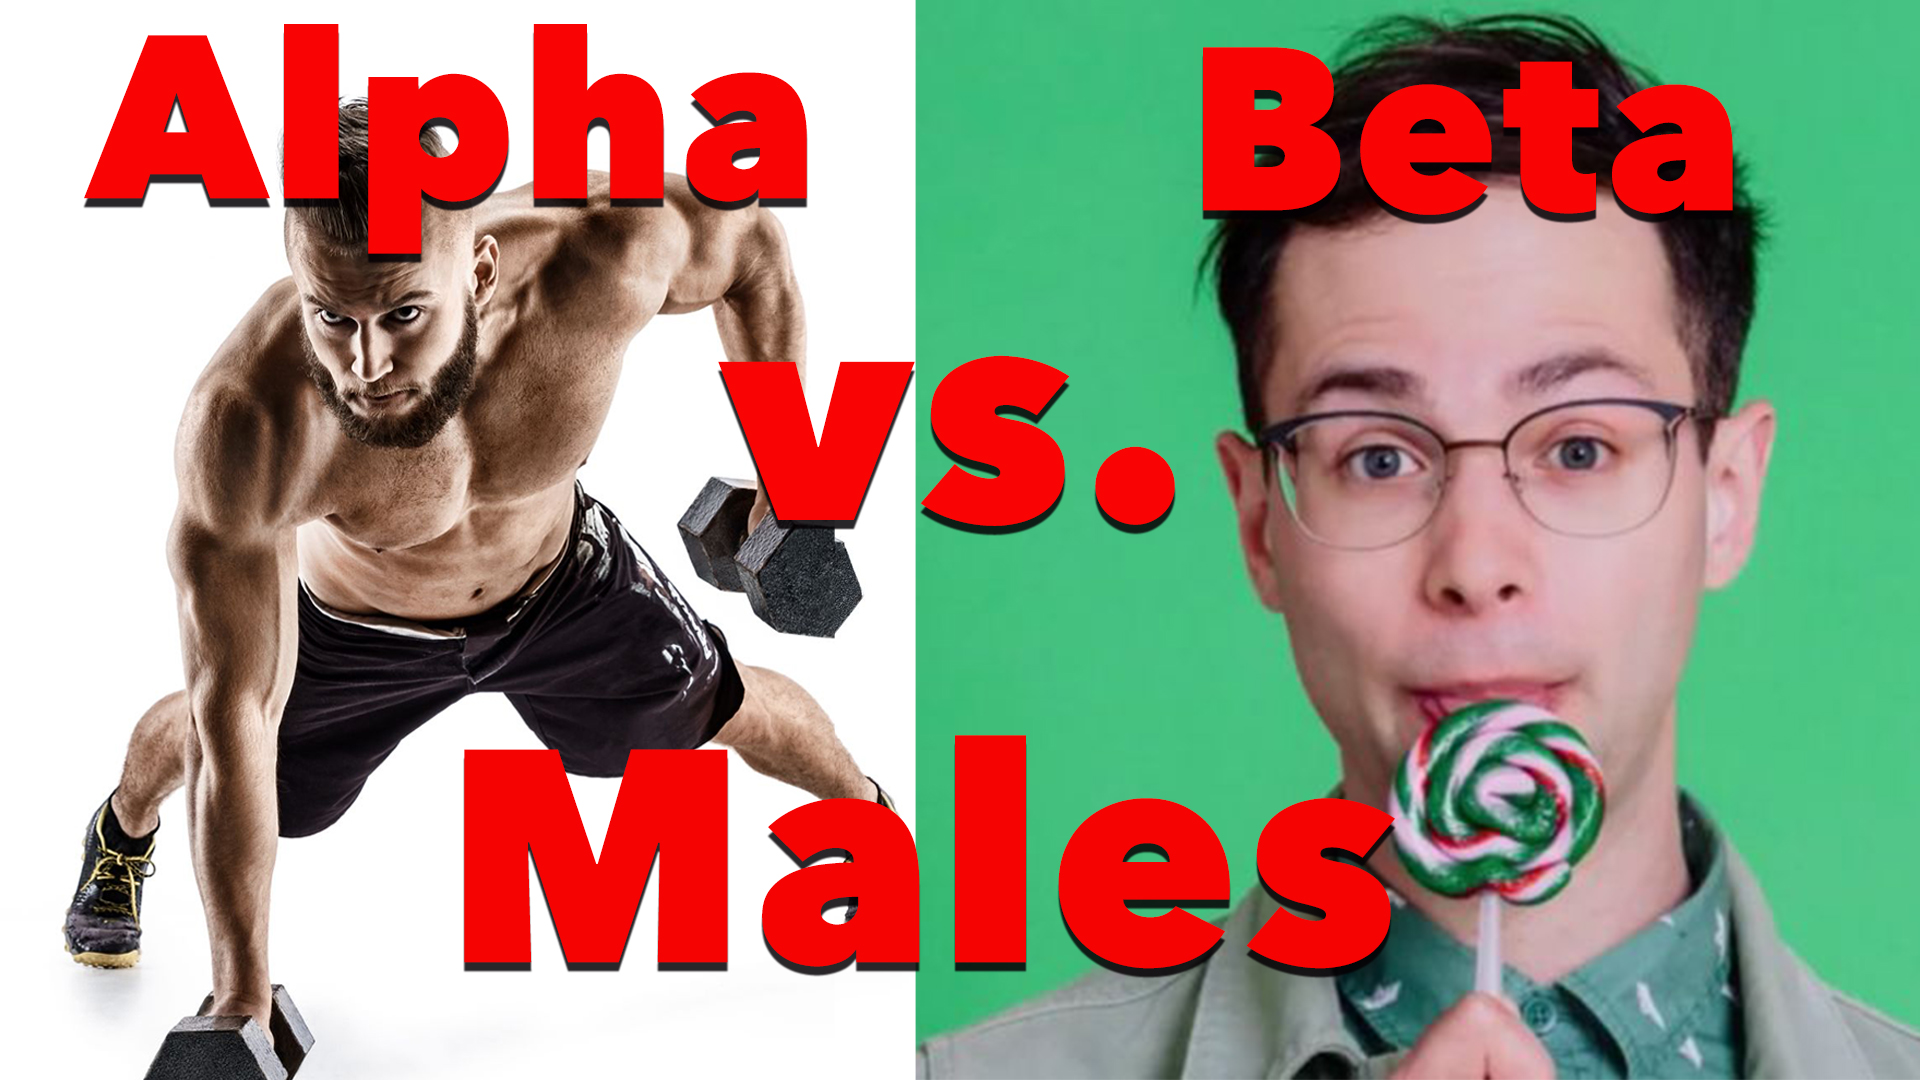 Whats the difference between a beta male and an alpha male?